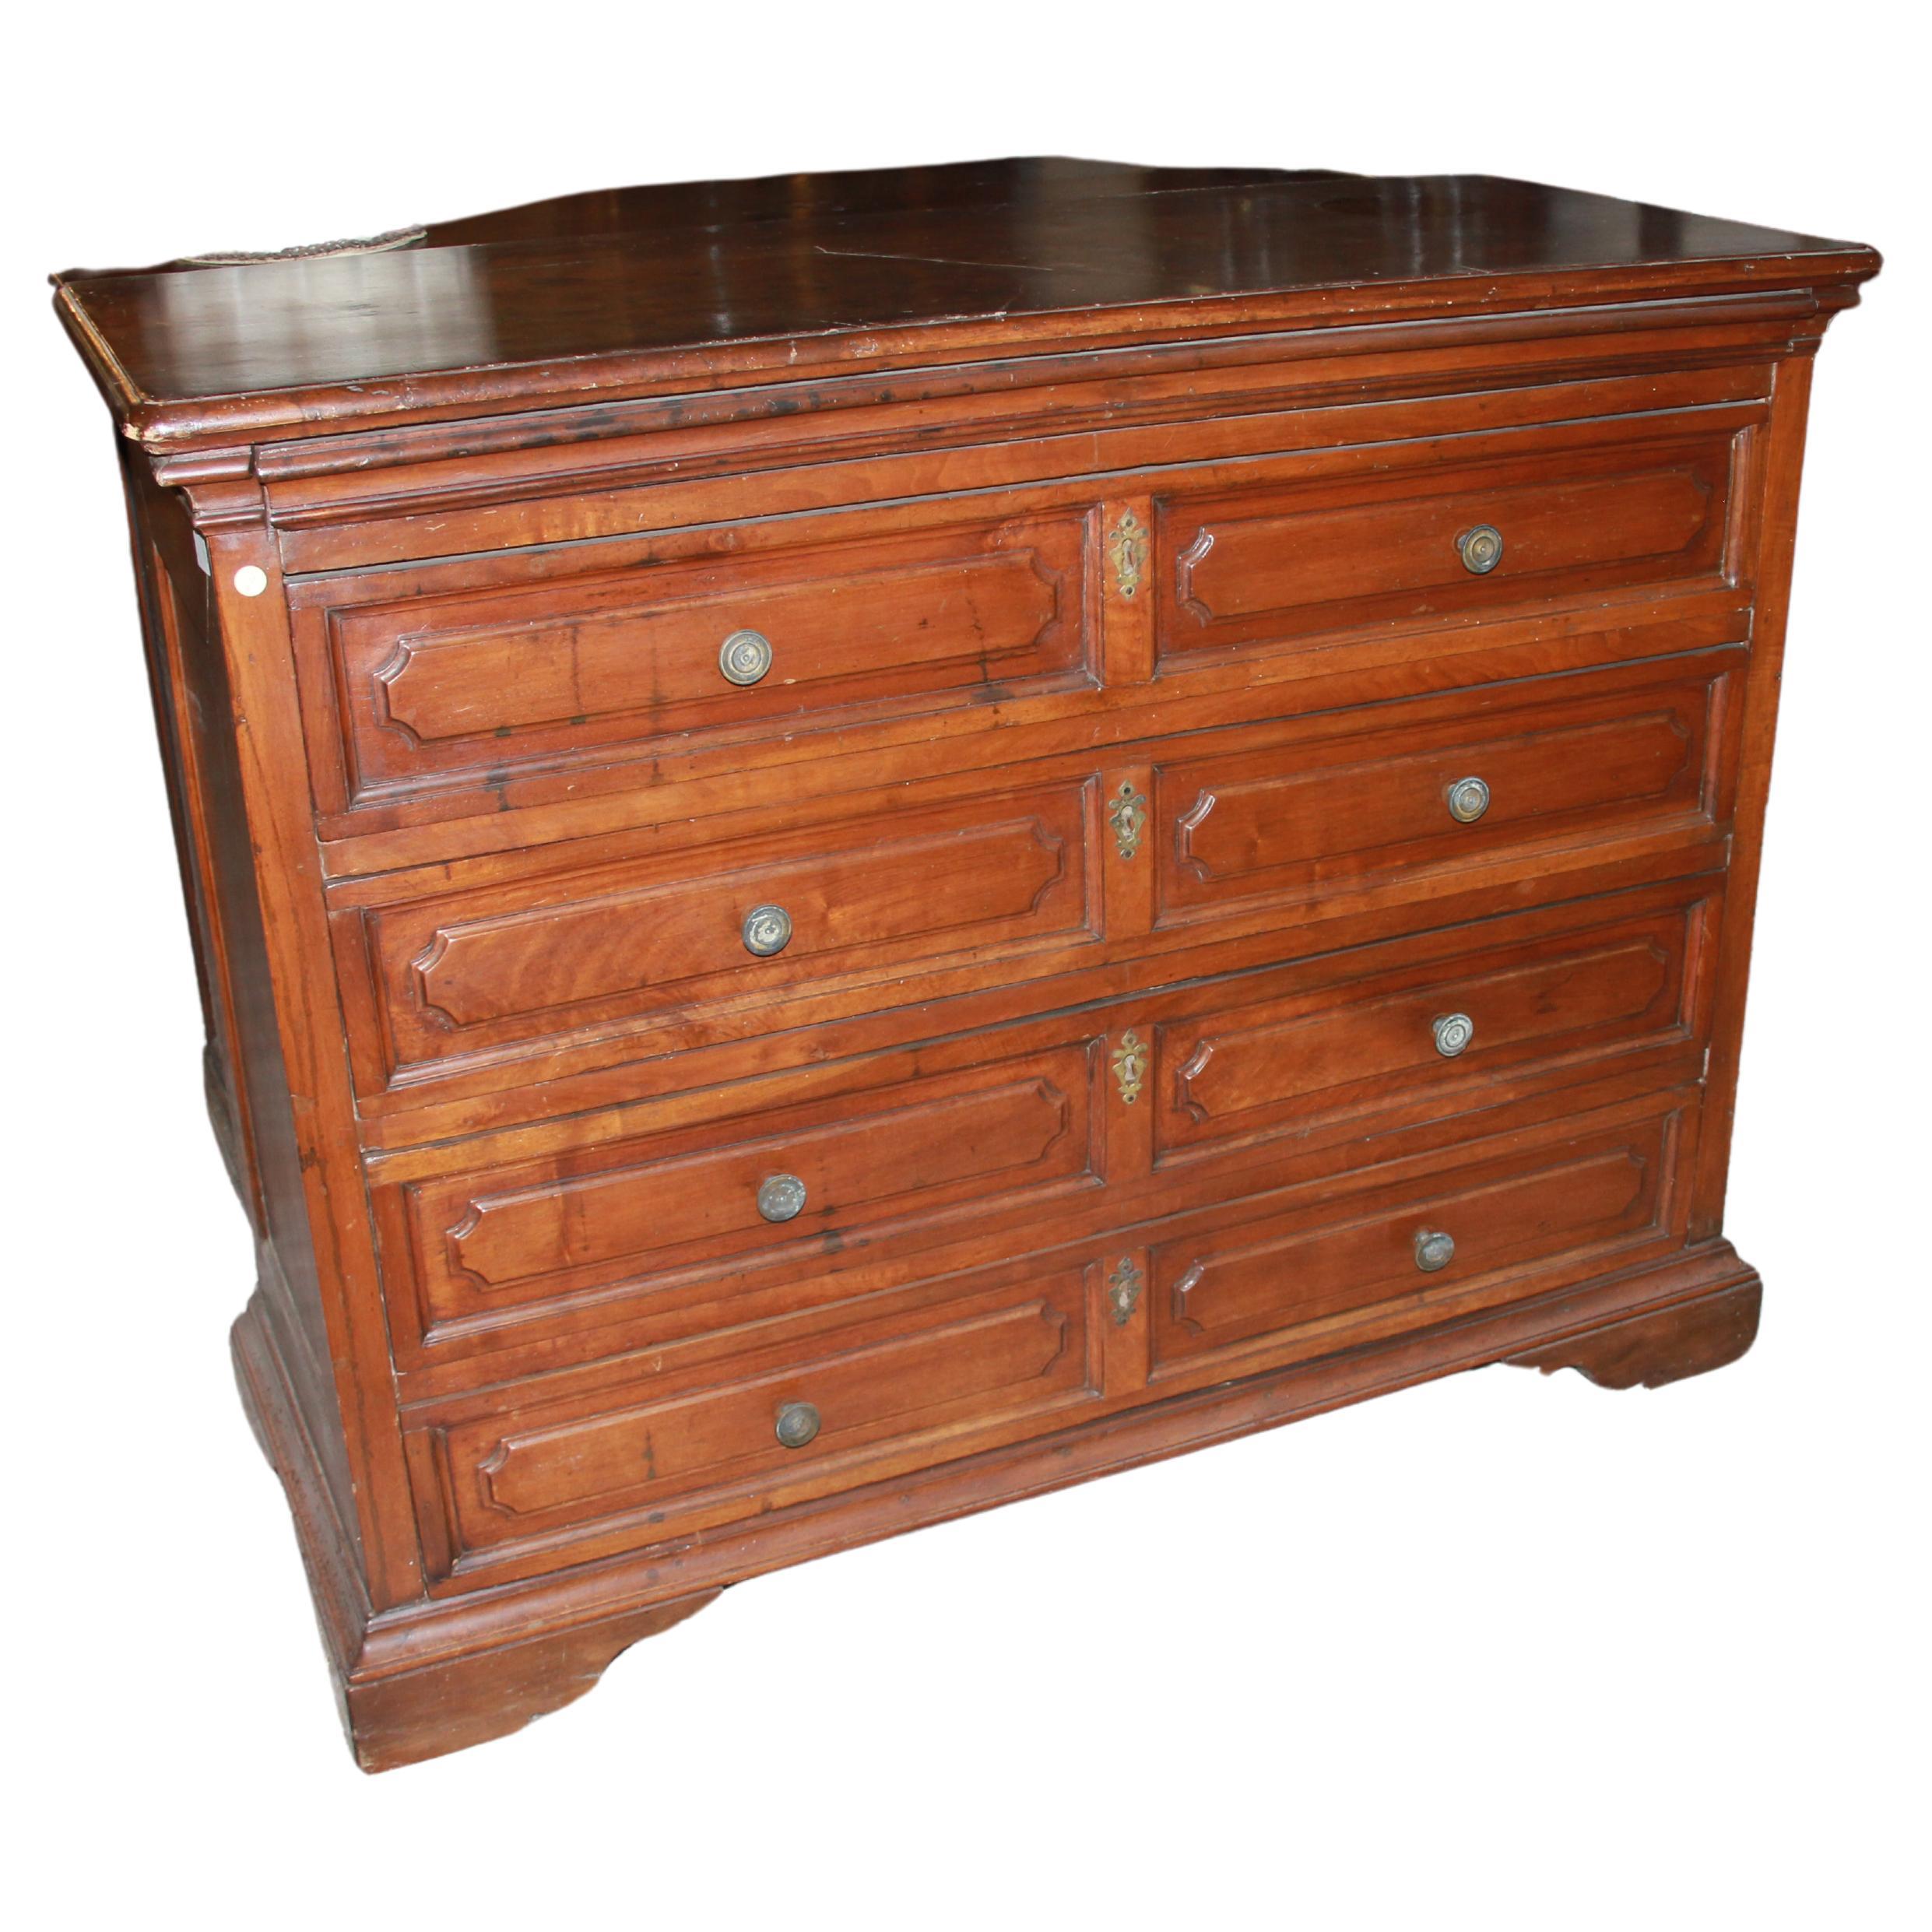  Italian chest of drawers from the 1600s in walnut wood For Sale